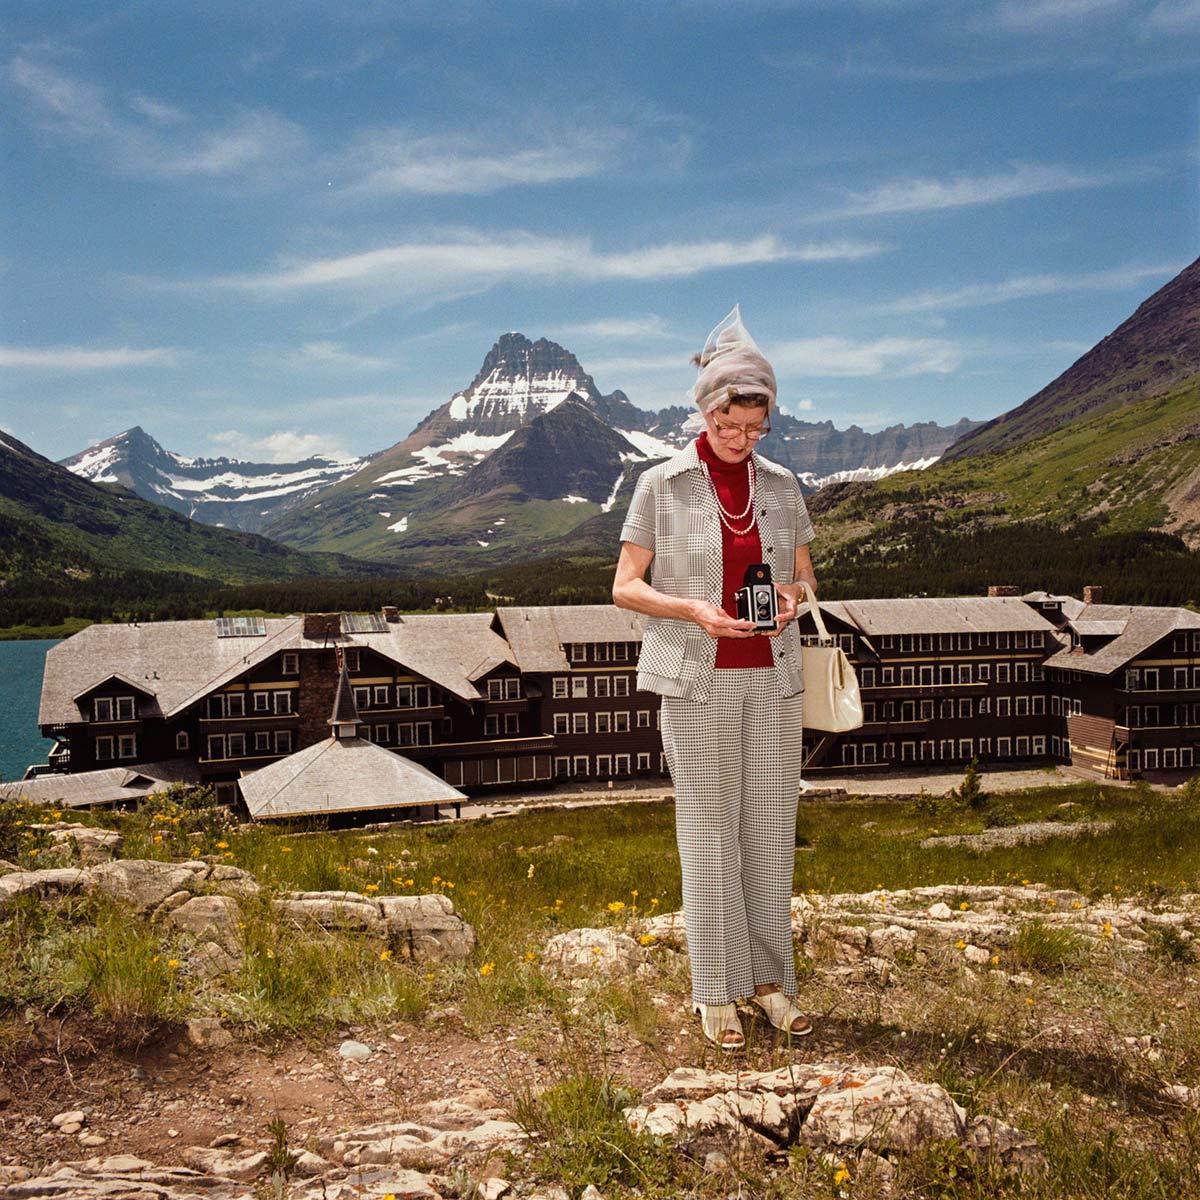 Woman-photographing-at-Many-Glacier-Hotel-Glacier-National-Park-MT-1981